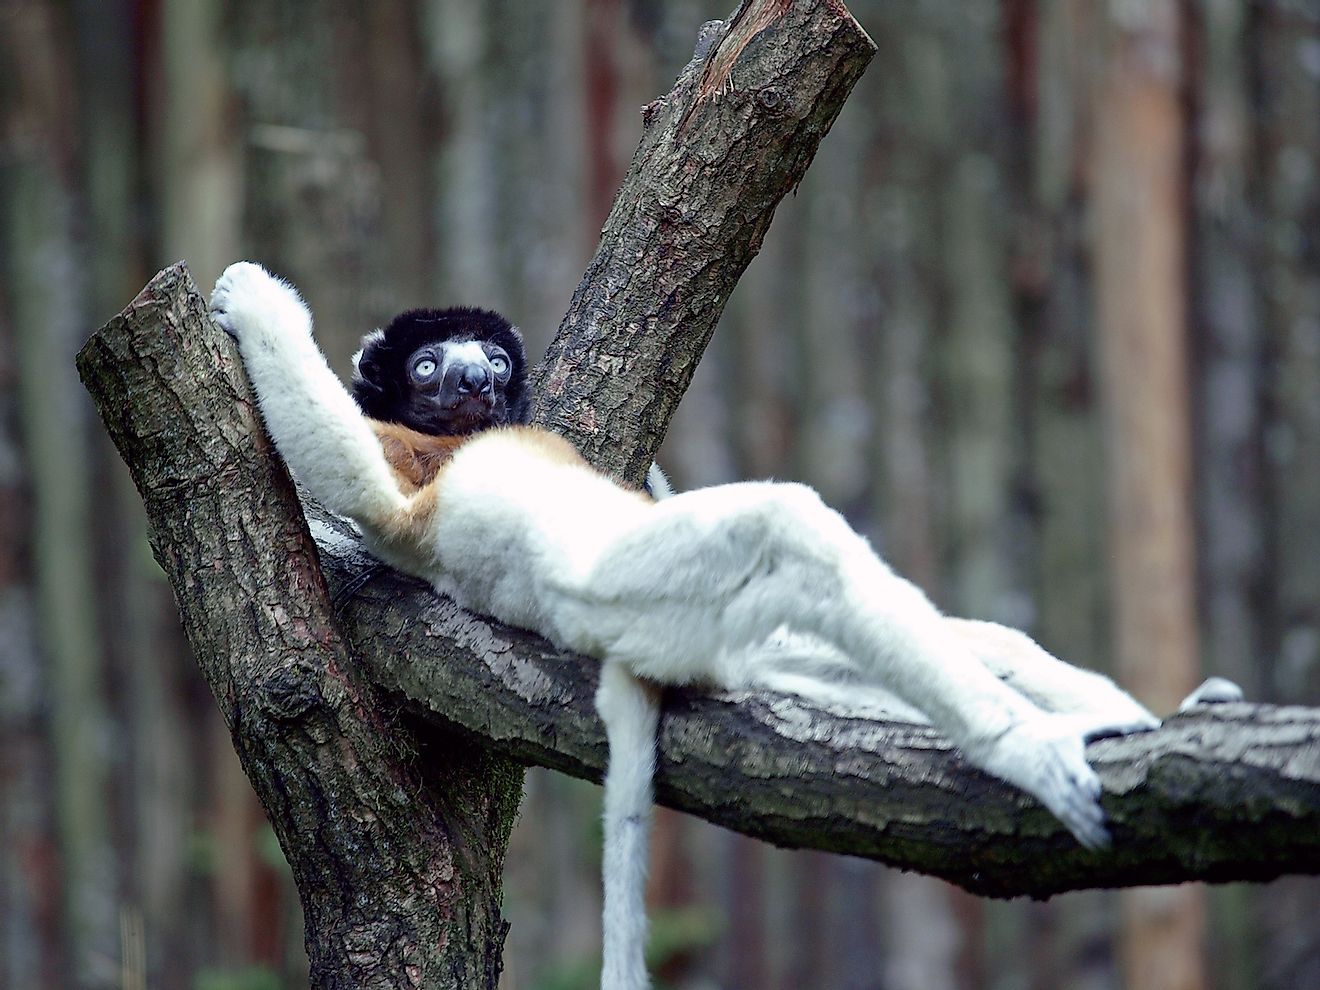 Crowned sifaka. Image credit: Edwin Butter/Shutterstock.com